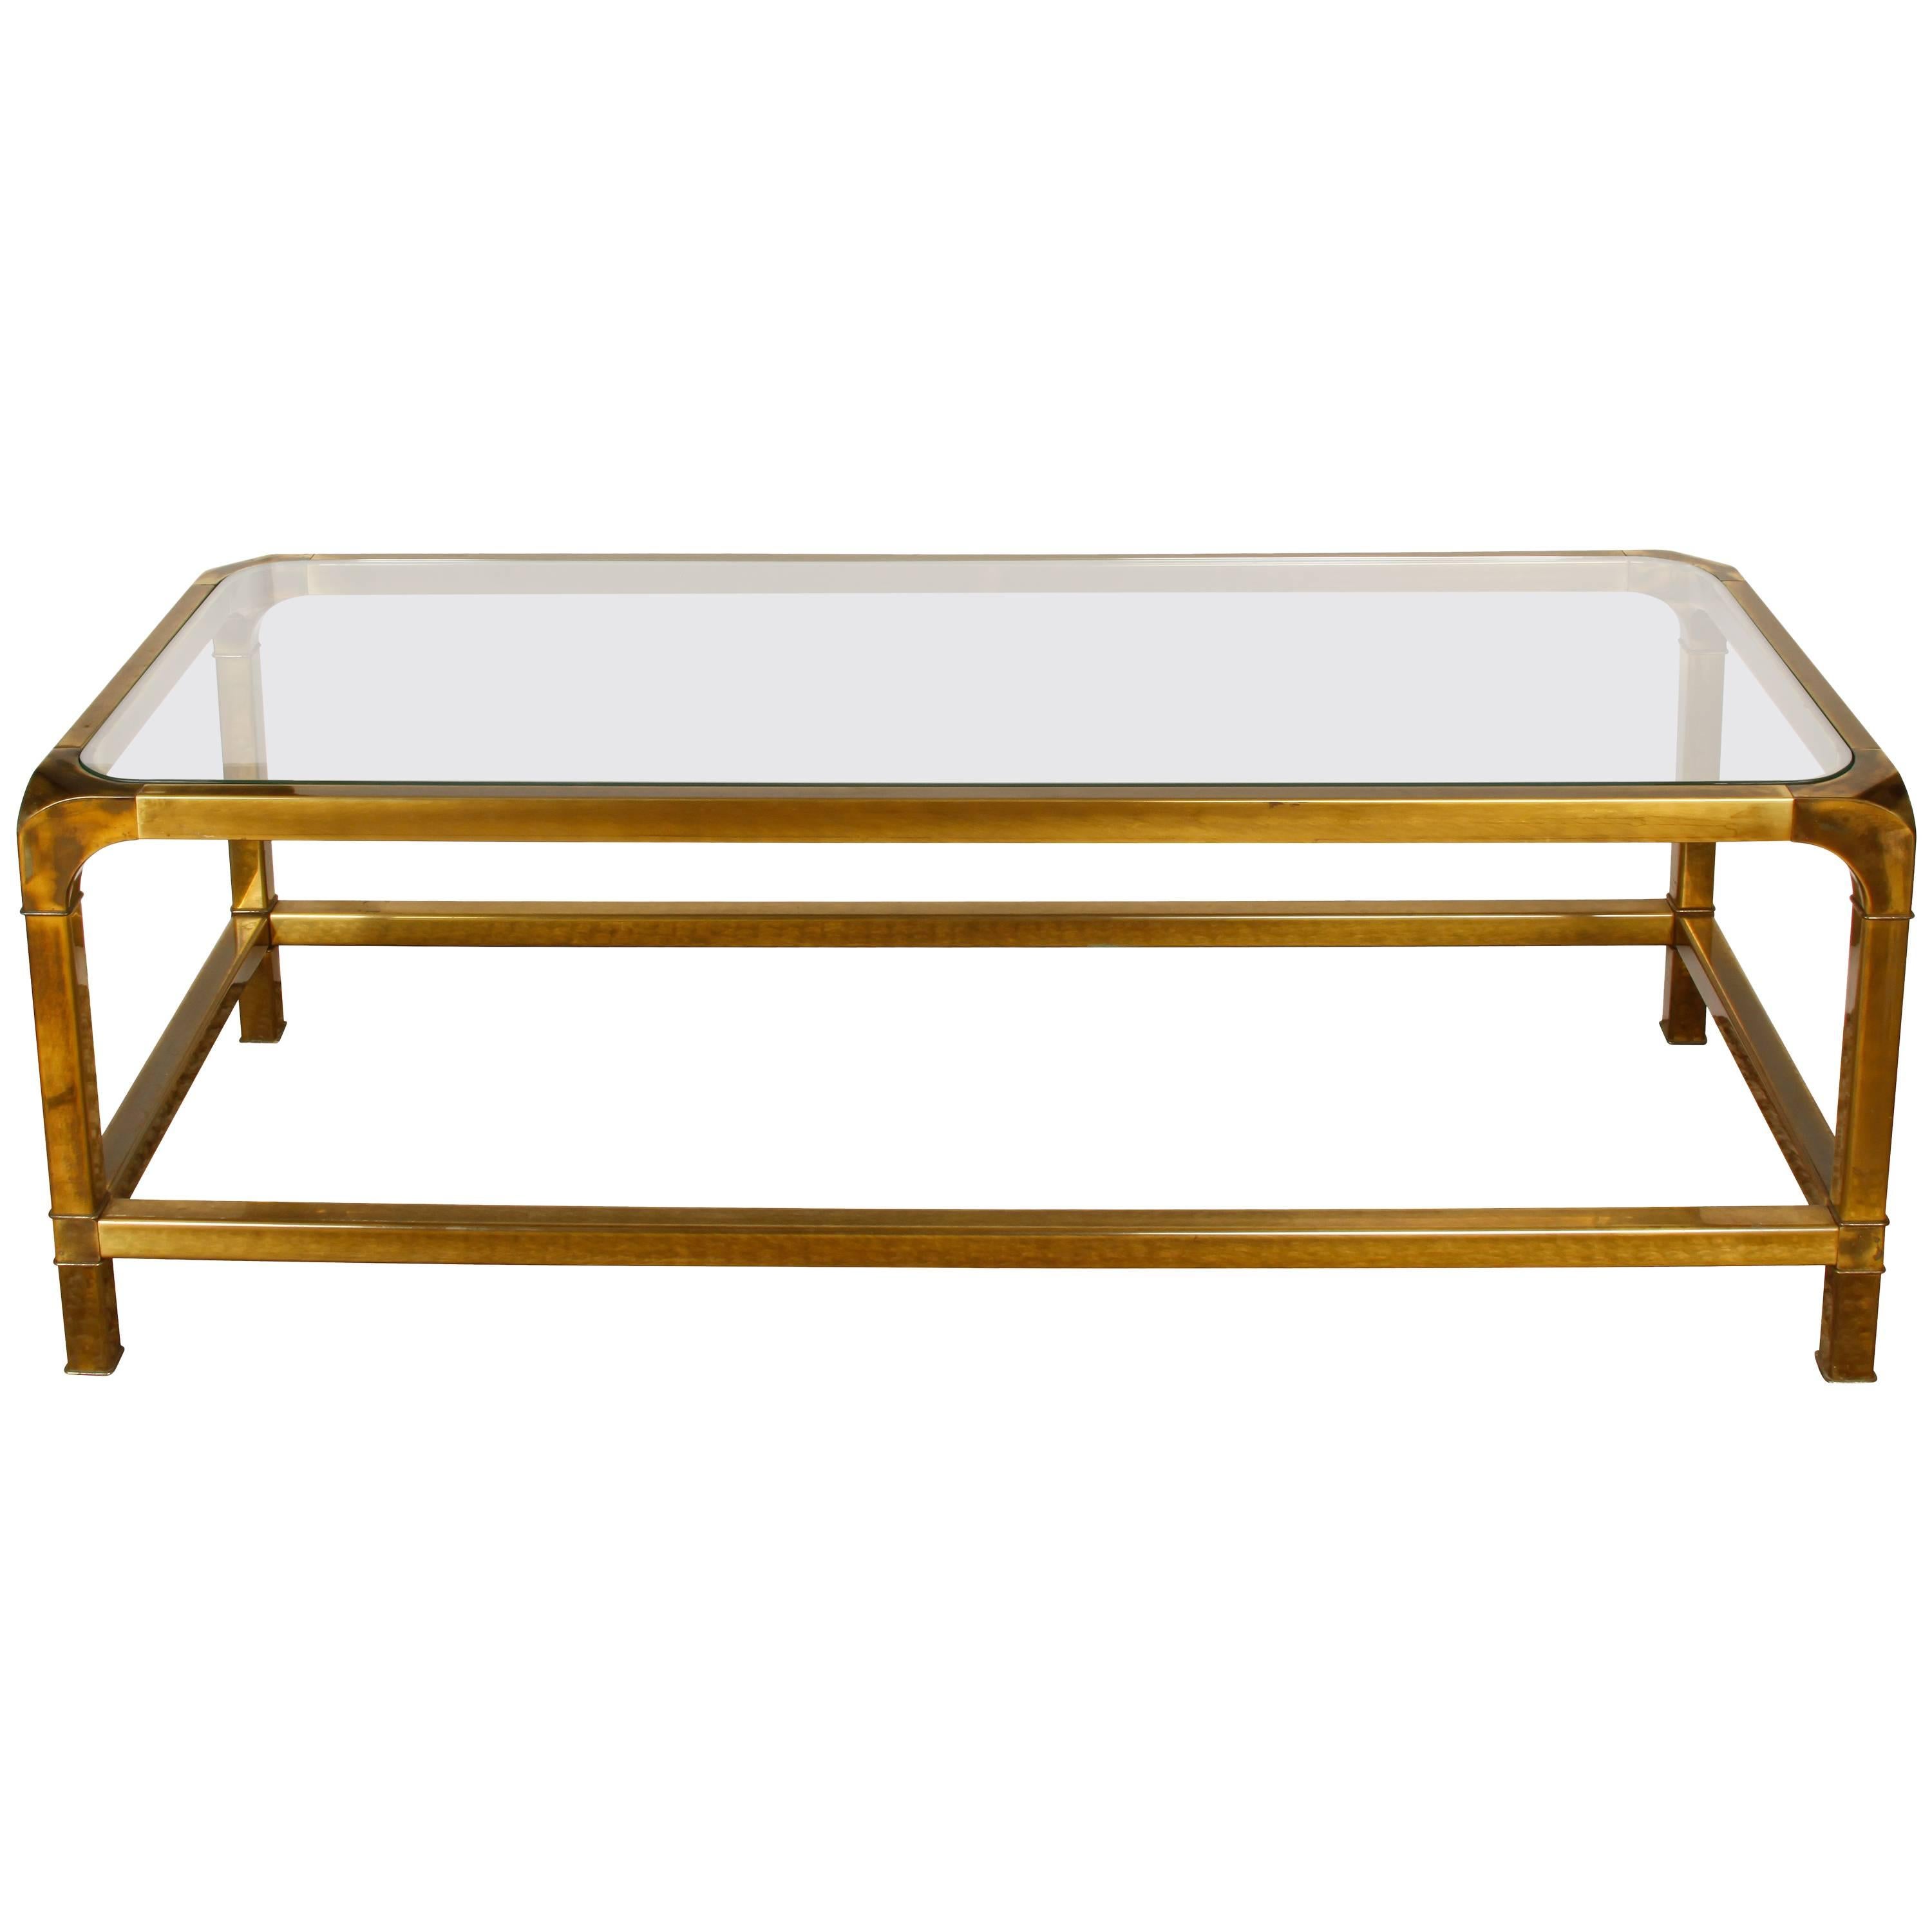 Mastercraft brass and glass cocktail table